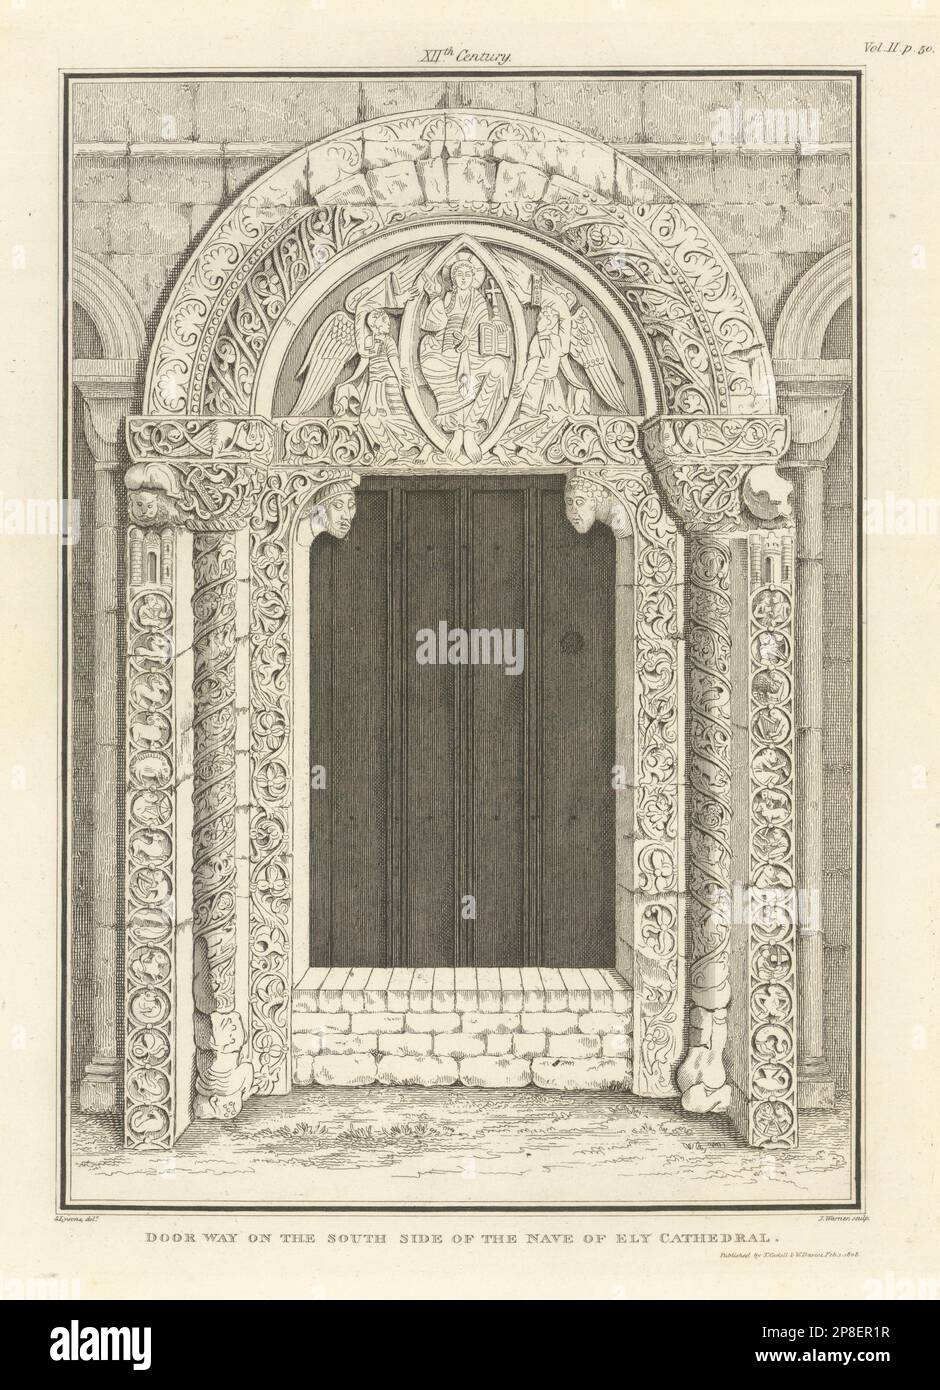 Doorway, on the south side of the nave of Ely Cathedral. LYSONS 1810 old print Stock Photo